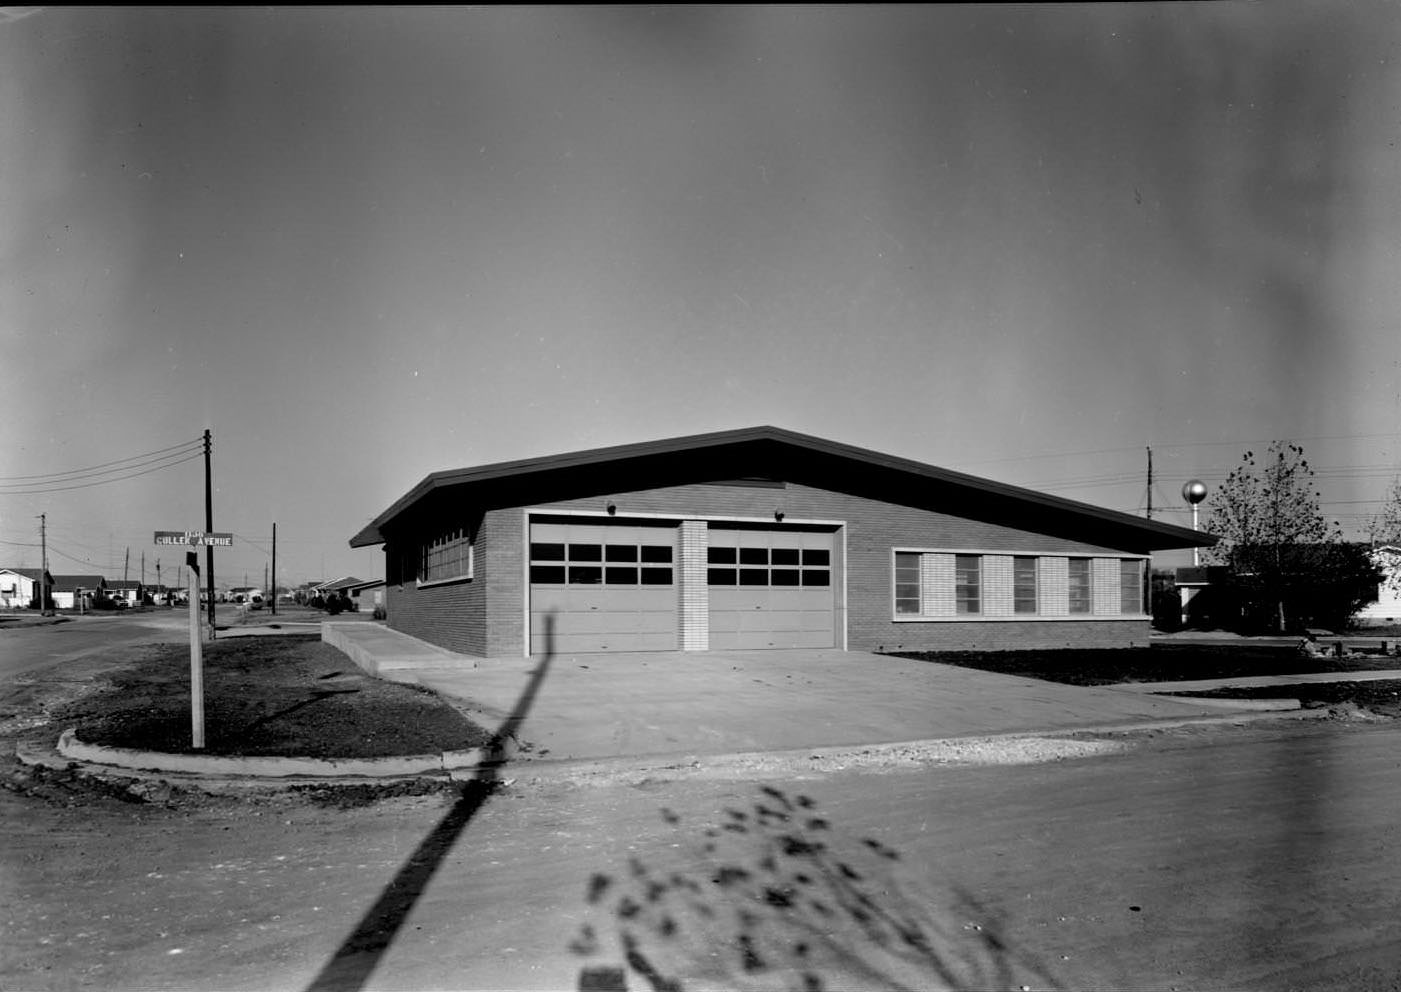 North Austin Fire Station No. 16 at 7000 Reese Lane at its intersection with Cullen Avenue, 1957